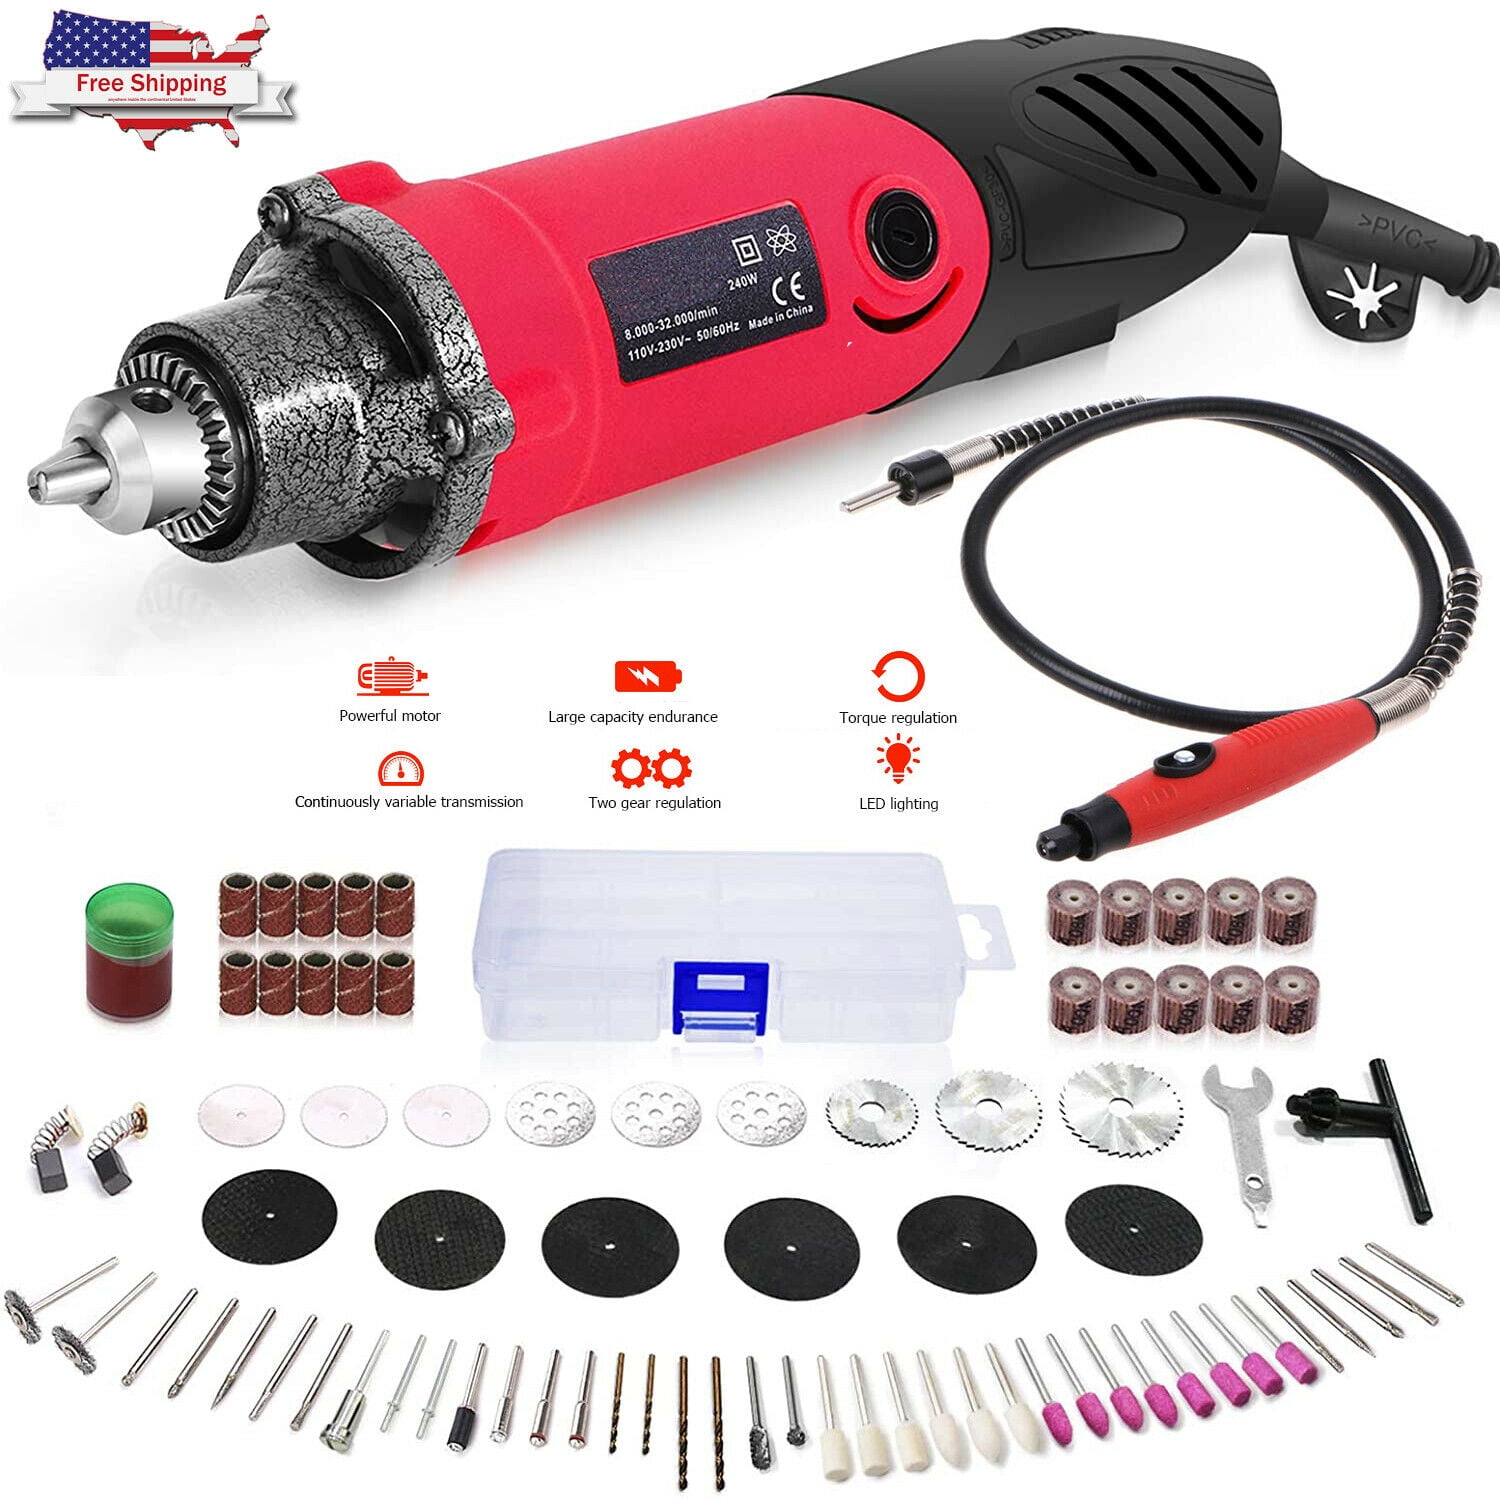 Fashion Craft Drill Hobby Electric Rotary Mini Drill Grinder Sanding  Engraving Set Tool